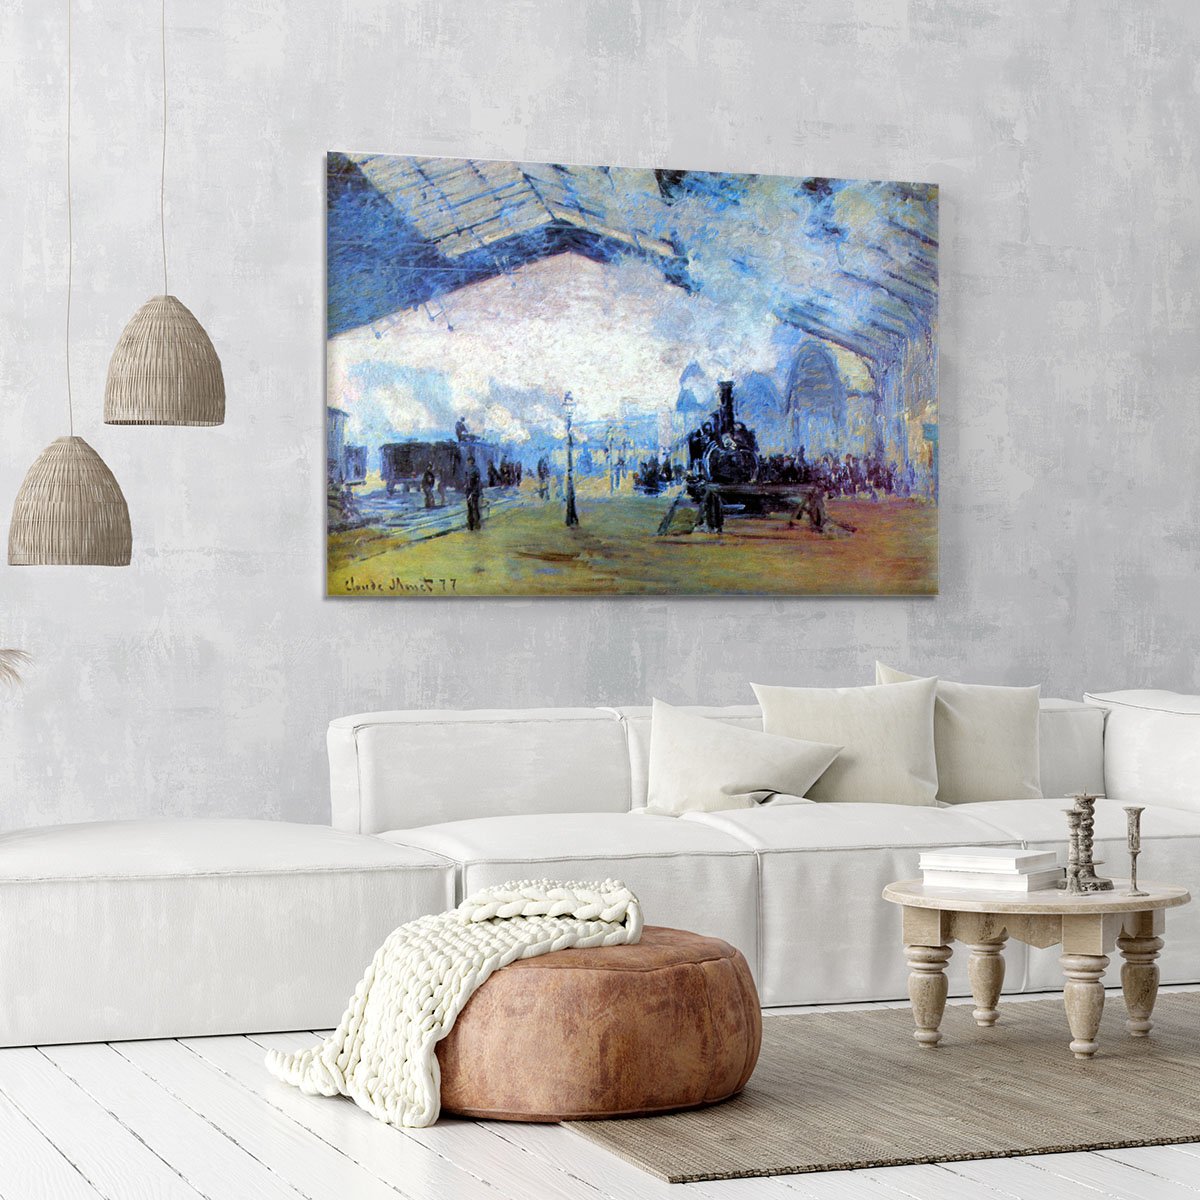 Saint Lazare station in Paris by Monet Canvas Print or Poster